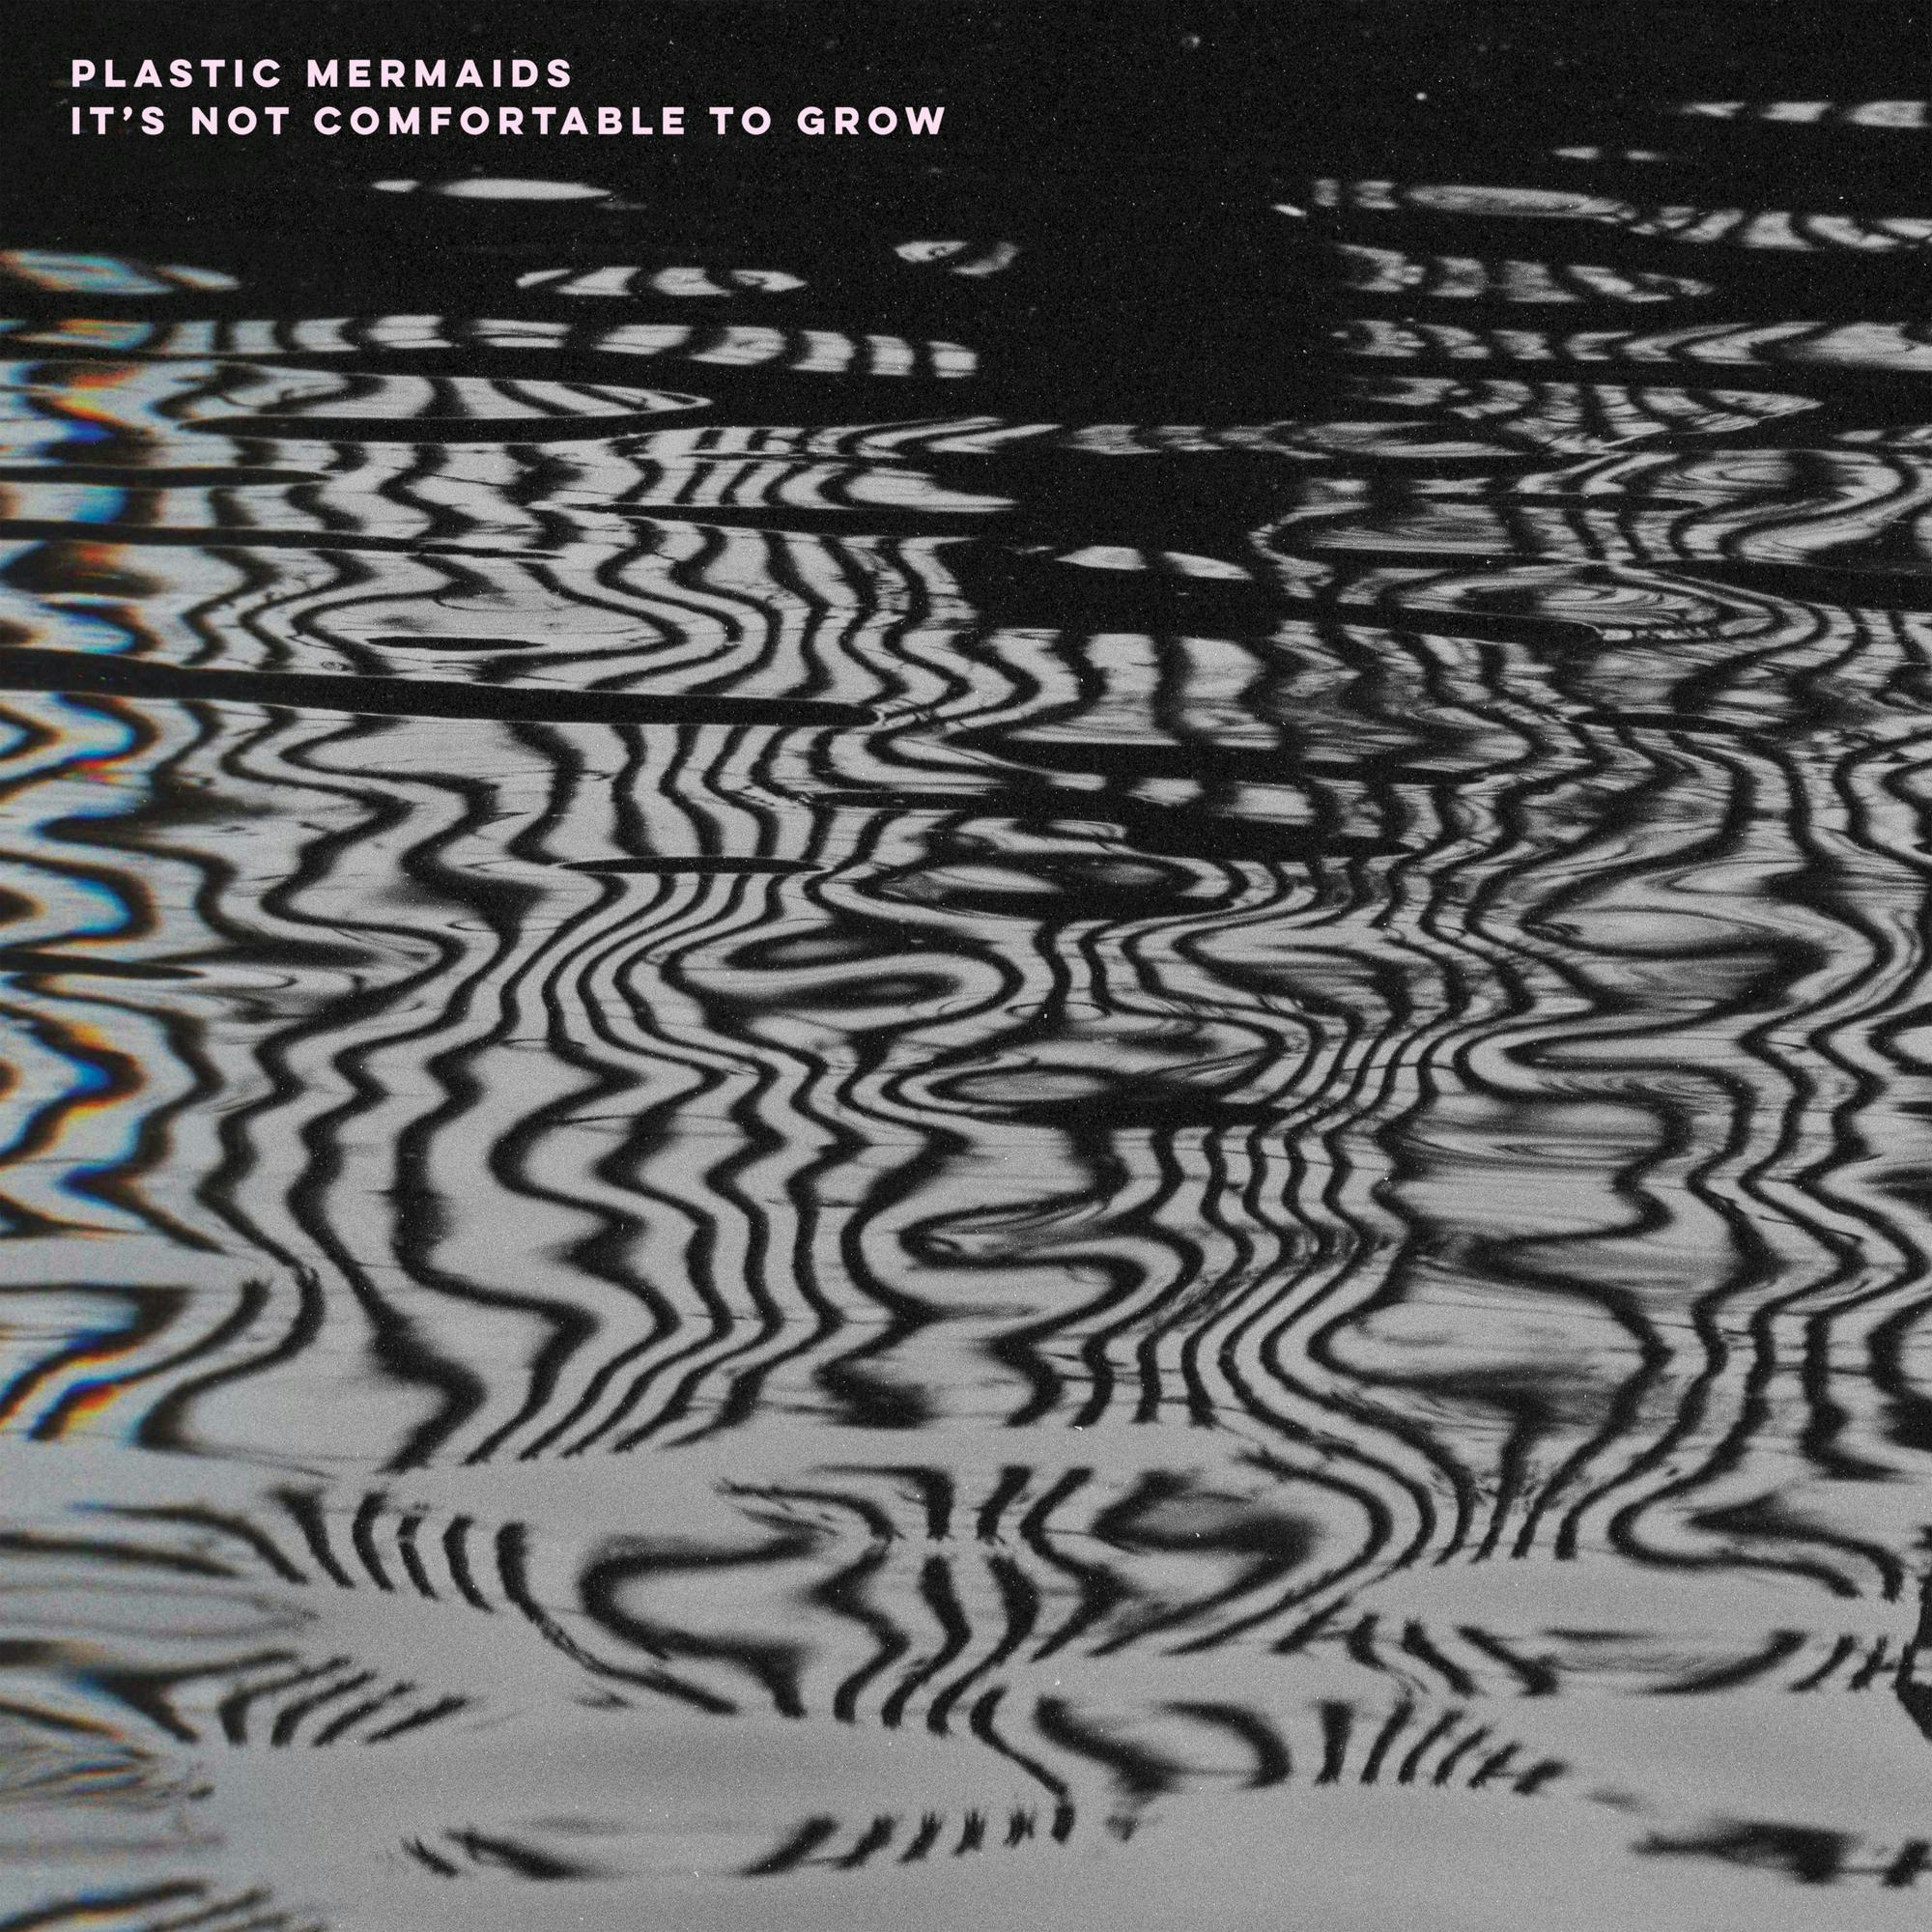 Album artwork for Album artwork for It's Not Comfortable To Grow by Plastic Mermaids by It's Not Comfortable To Grow - Plastic Mermaids